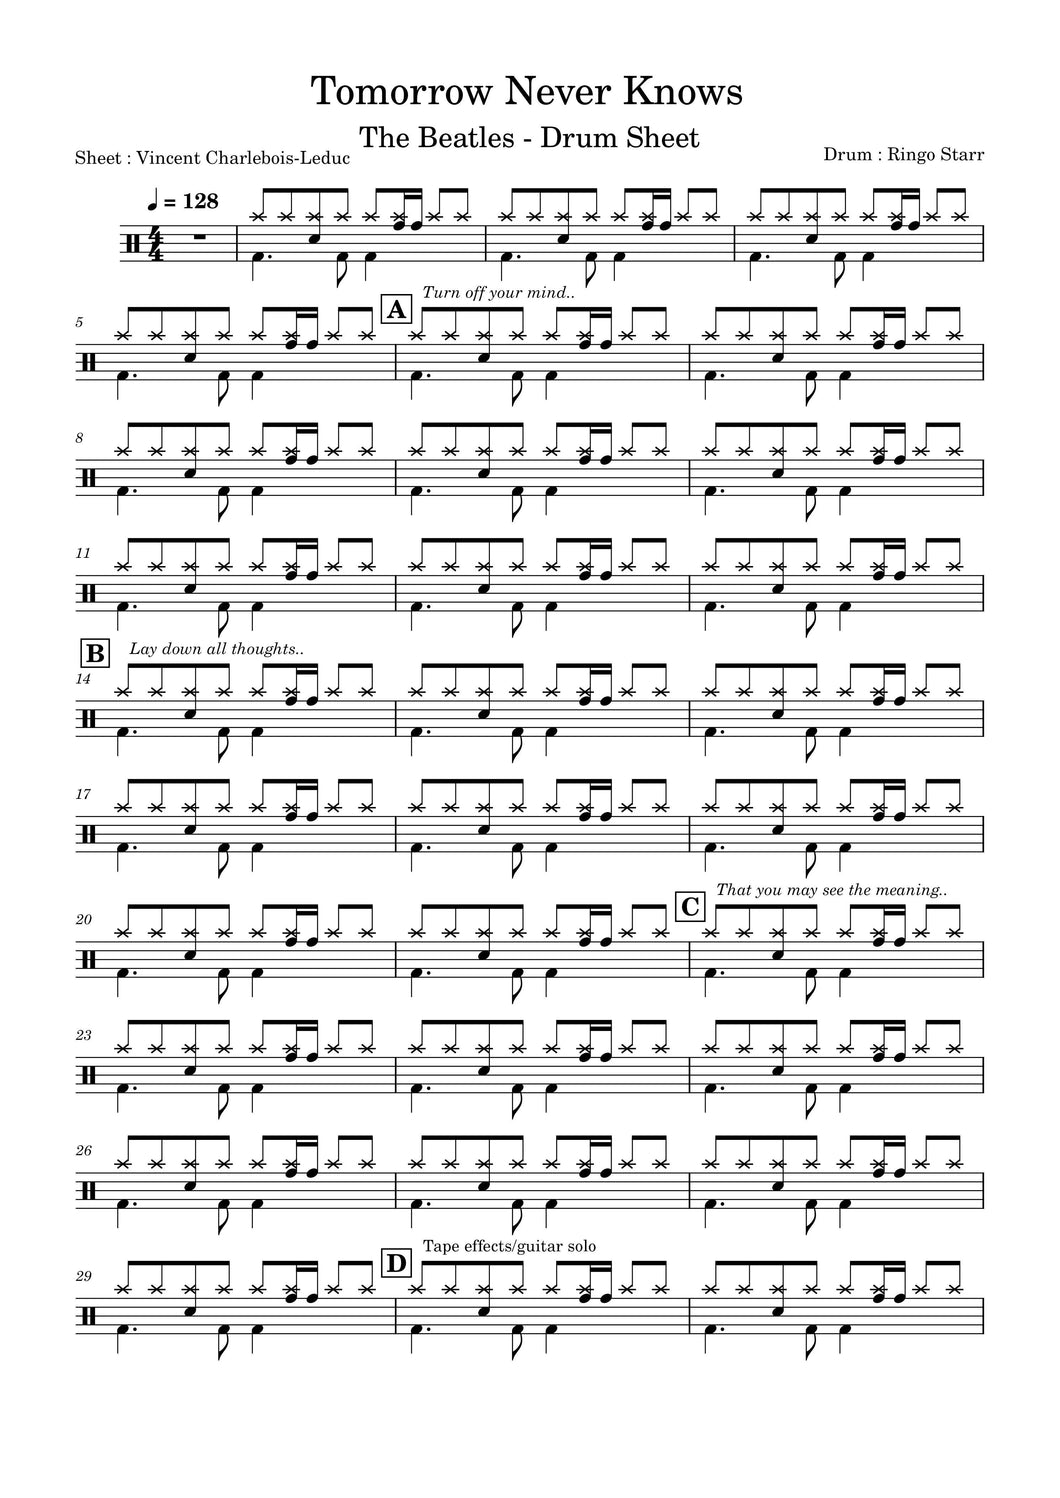 Tomorrow Never Knows - The Beatles - Drum Sheet Music - Vince’s Scores ...